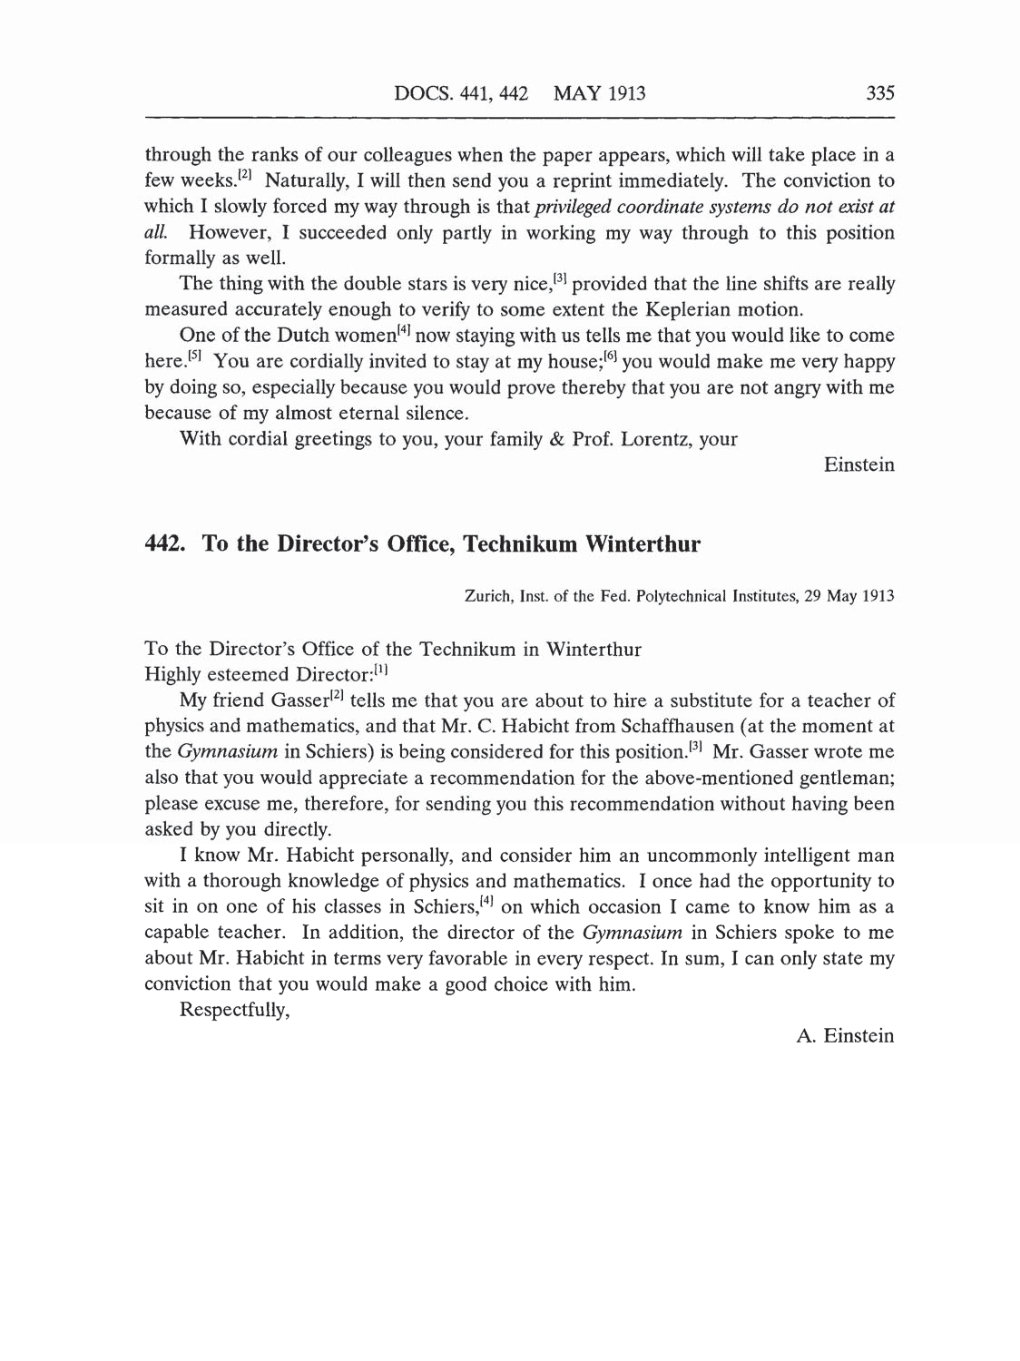 Volume 5: The Swiss Years: Correspondence, 1902-1914 (English translation supplement) page 335